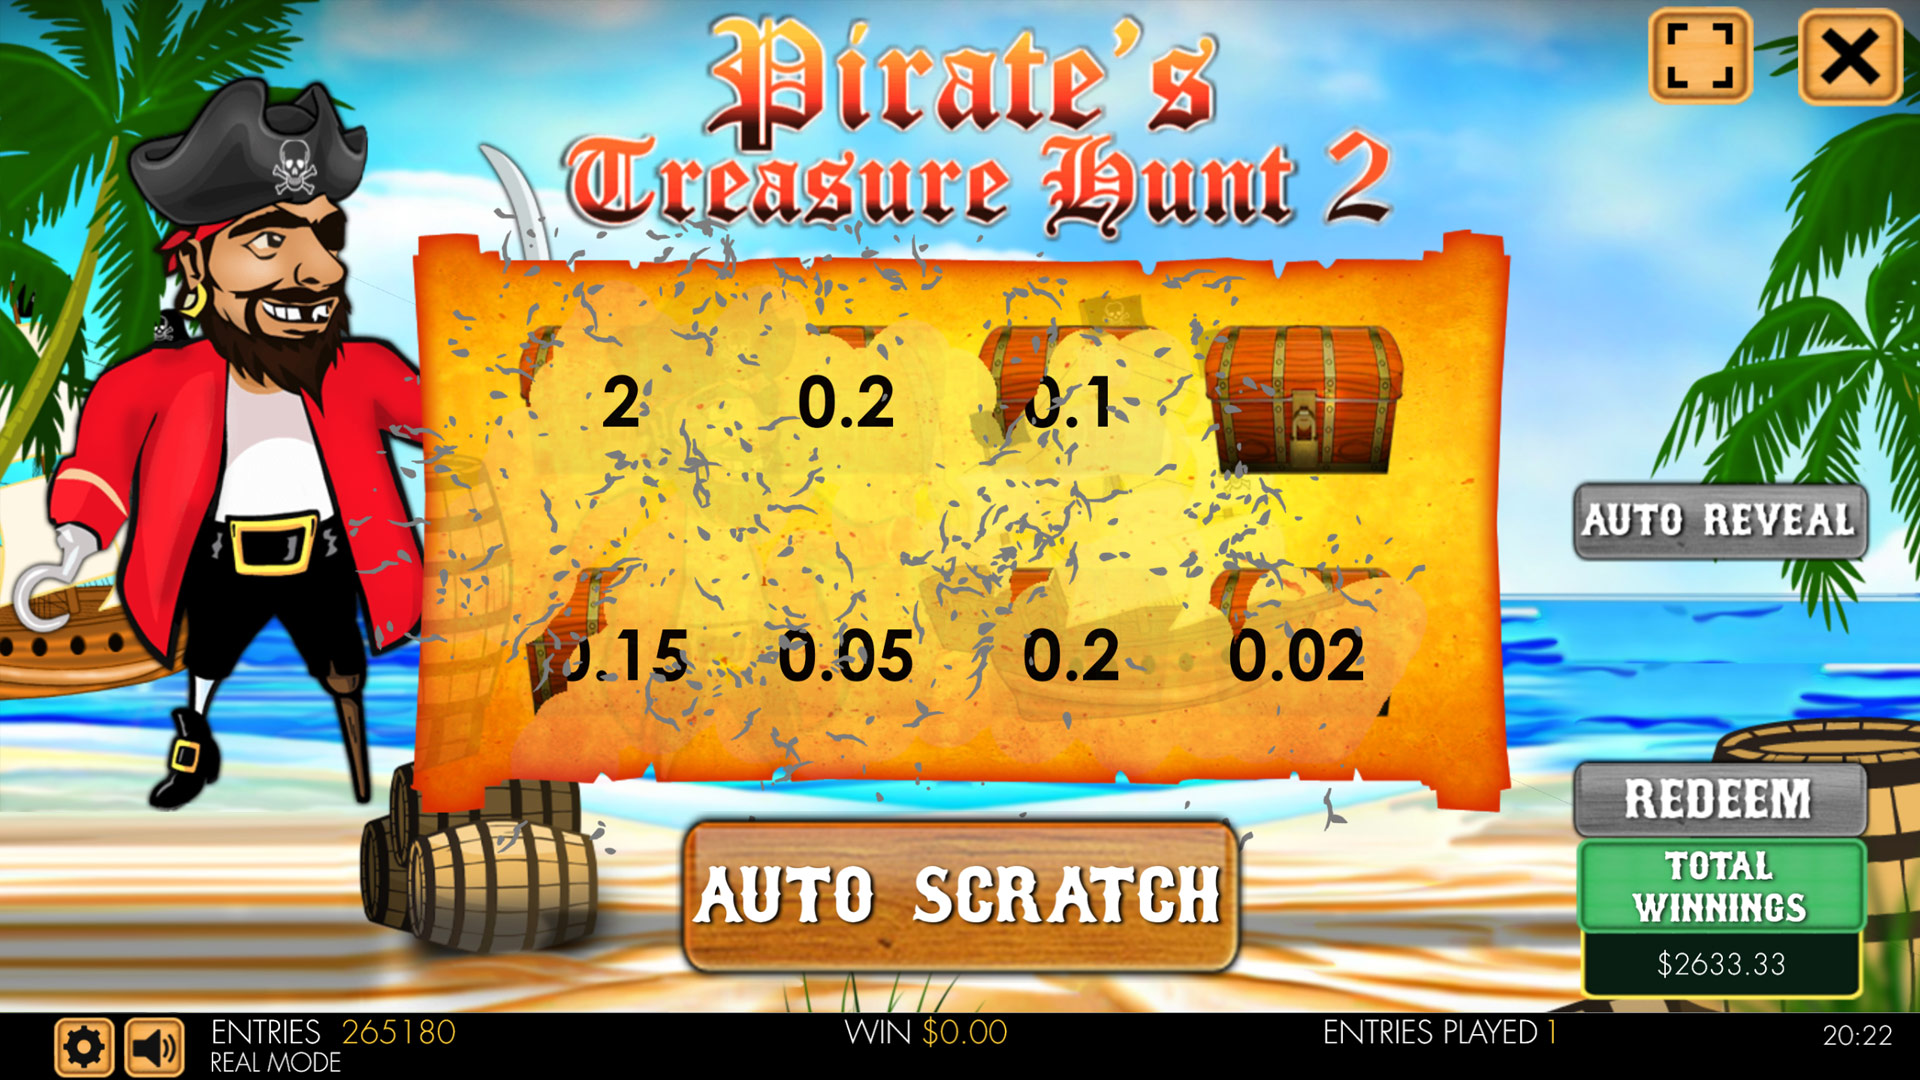 Pirate's Treasure Hunt 2 Scratch Mobile and PC Preview Pic Main Screen 1